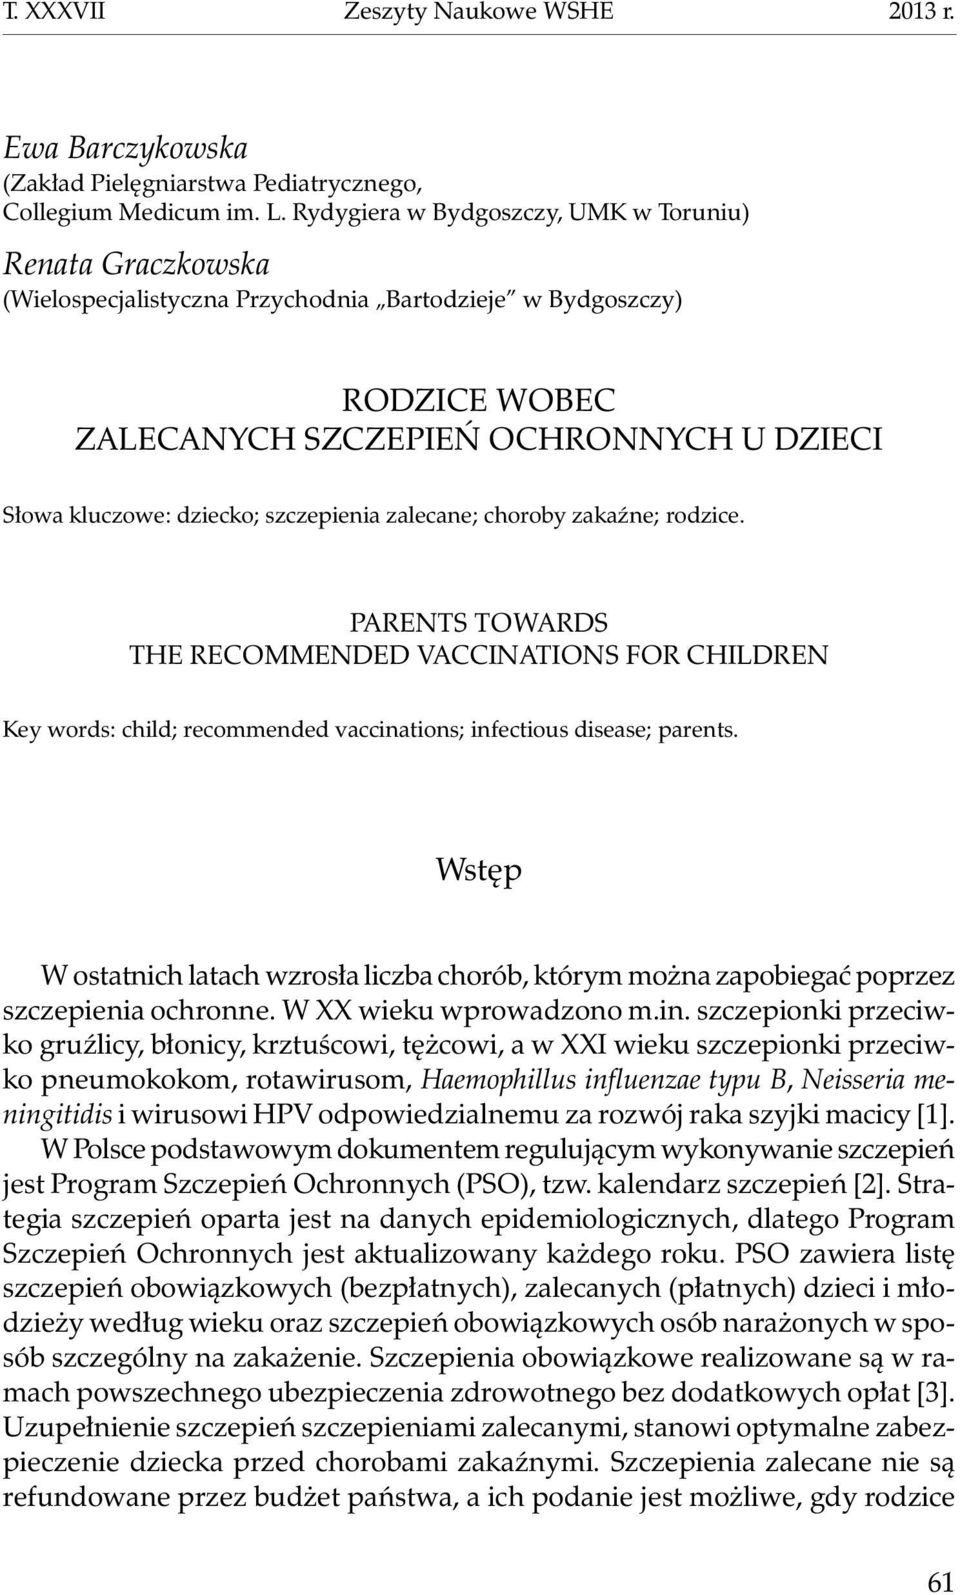 szczepienia zalecane; choroby zakaźne; rodzice. Parents towards the recommended vaccinations for children Key words: child; recommended vaccinations; infectious disease; parents.